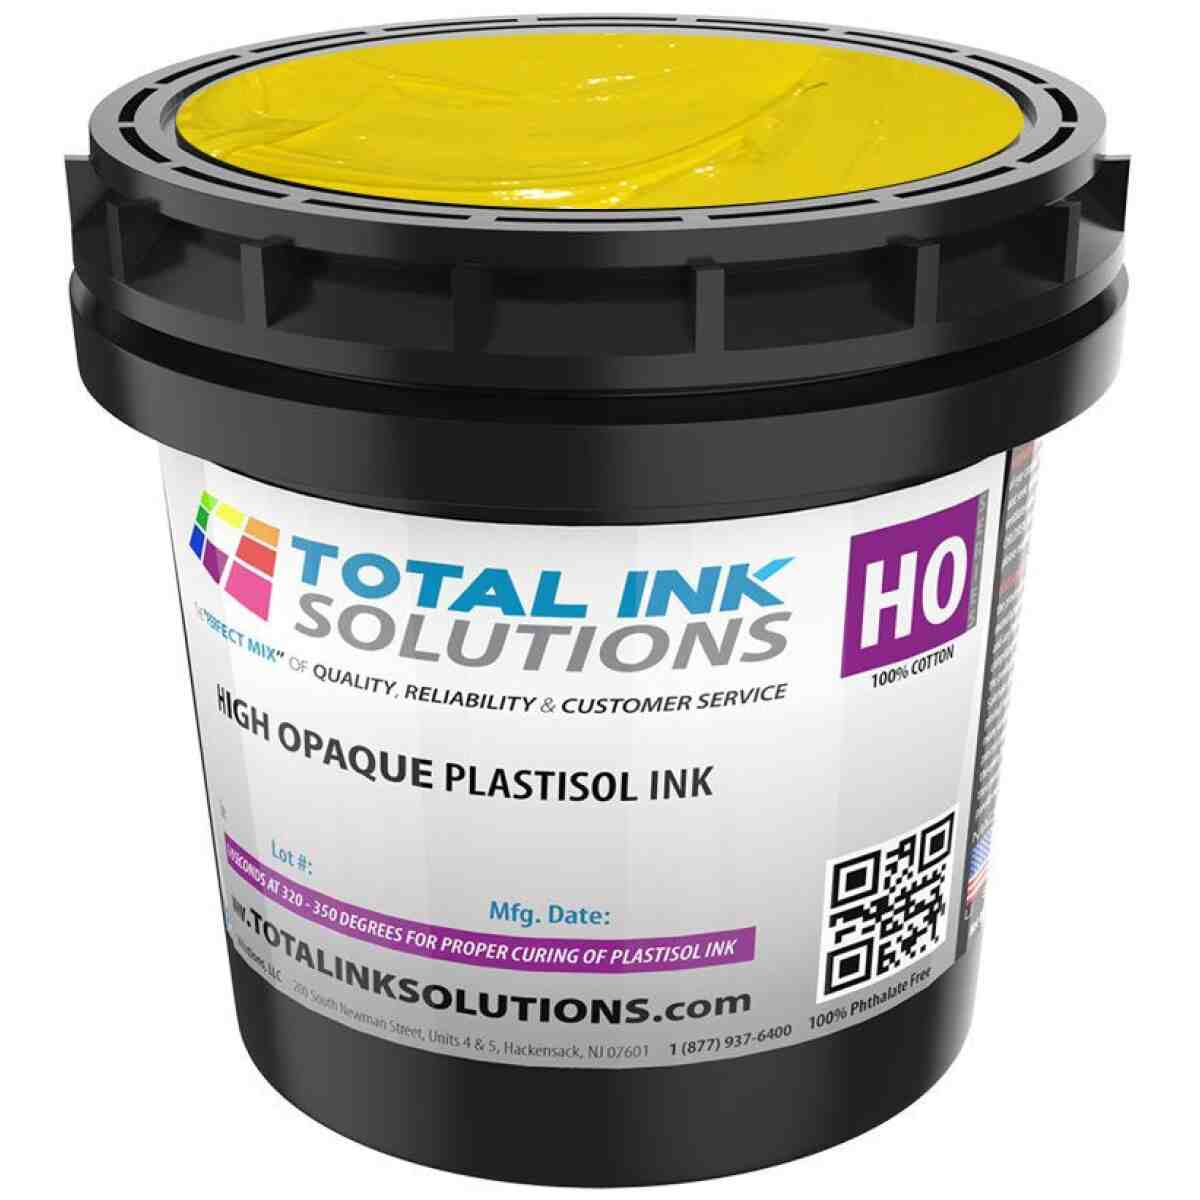 High Opaque Plastisol Ink – Quart TOTAL INK SOLUTIONS®